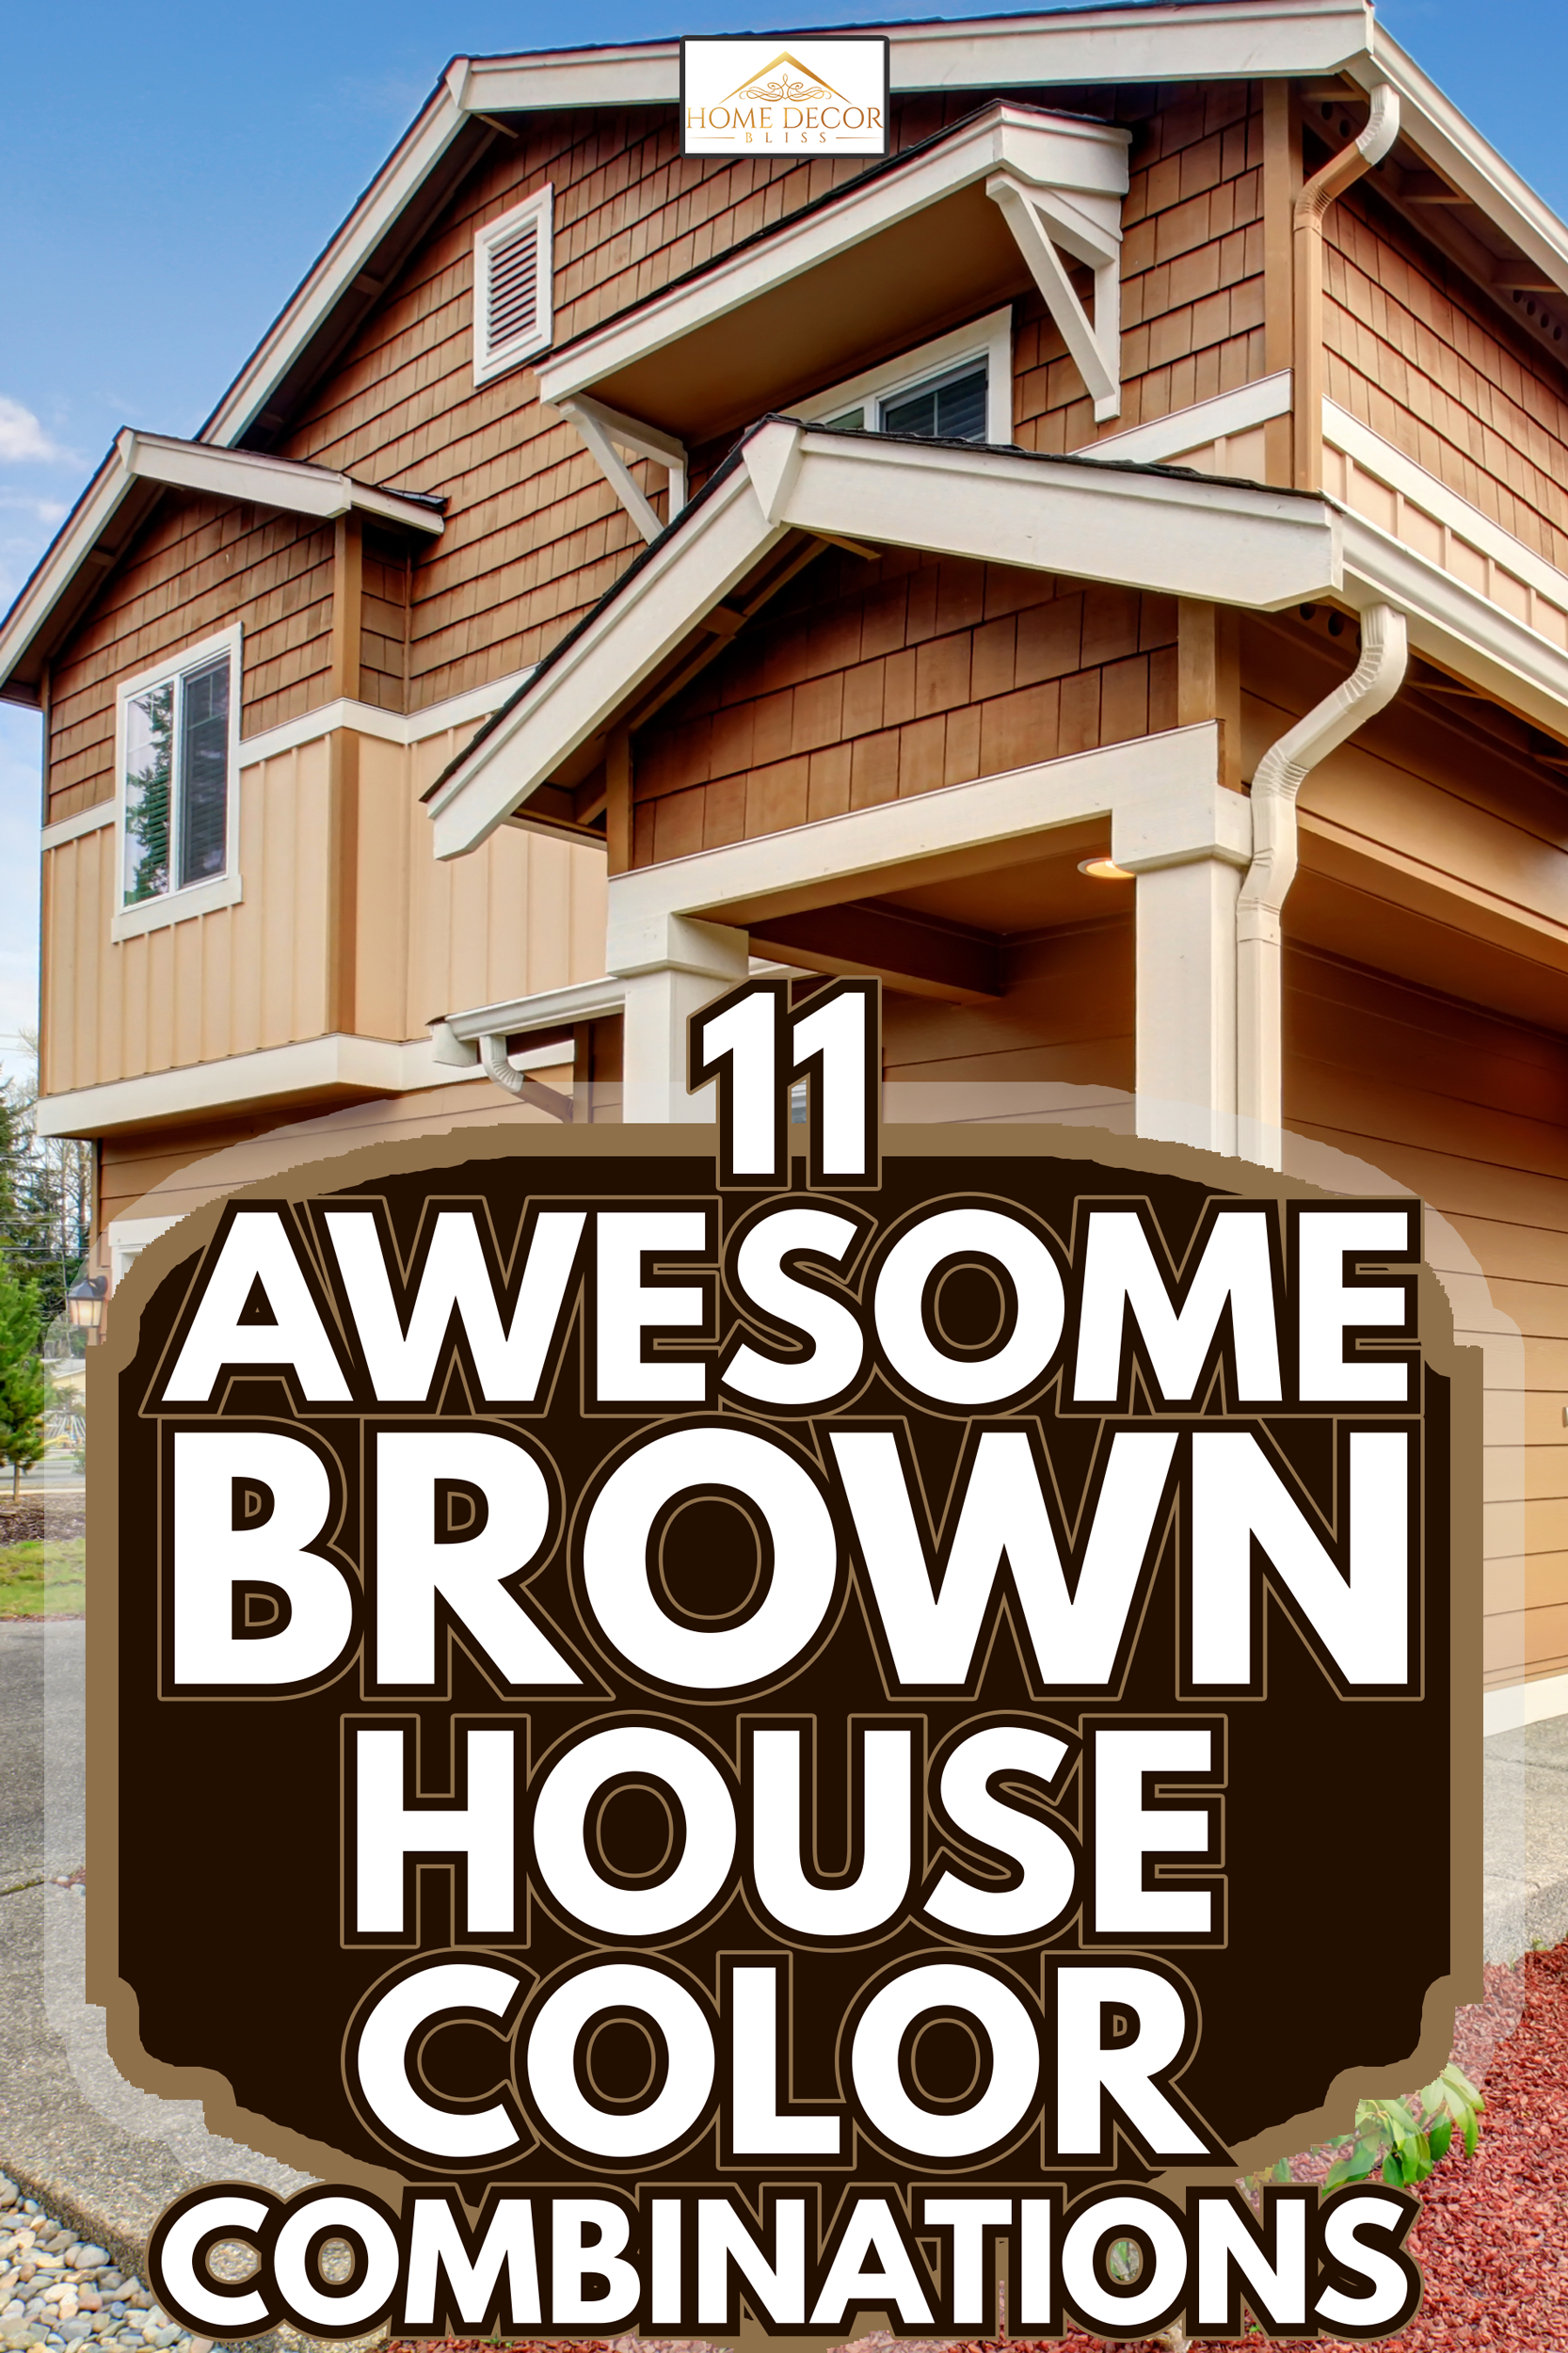 Large tan house with white trim, garage, and big driveway - 11 Awesome Brown House Color Combinations